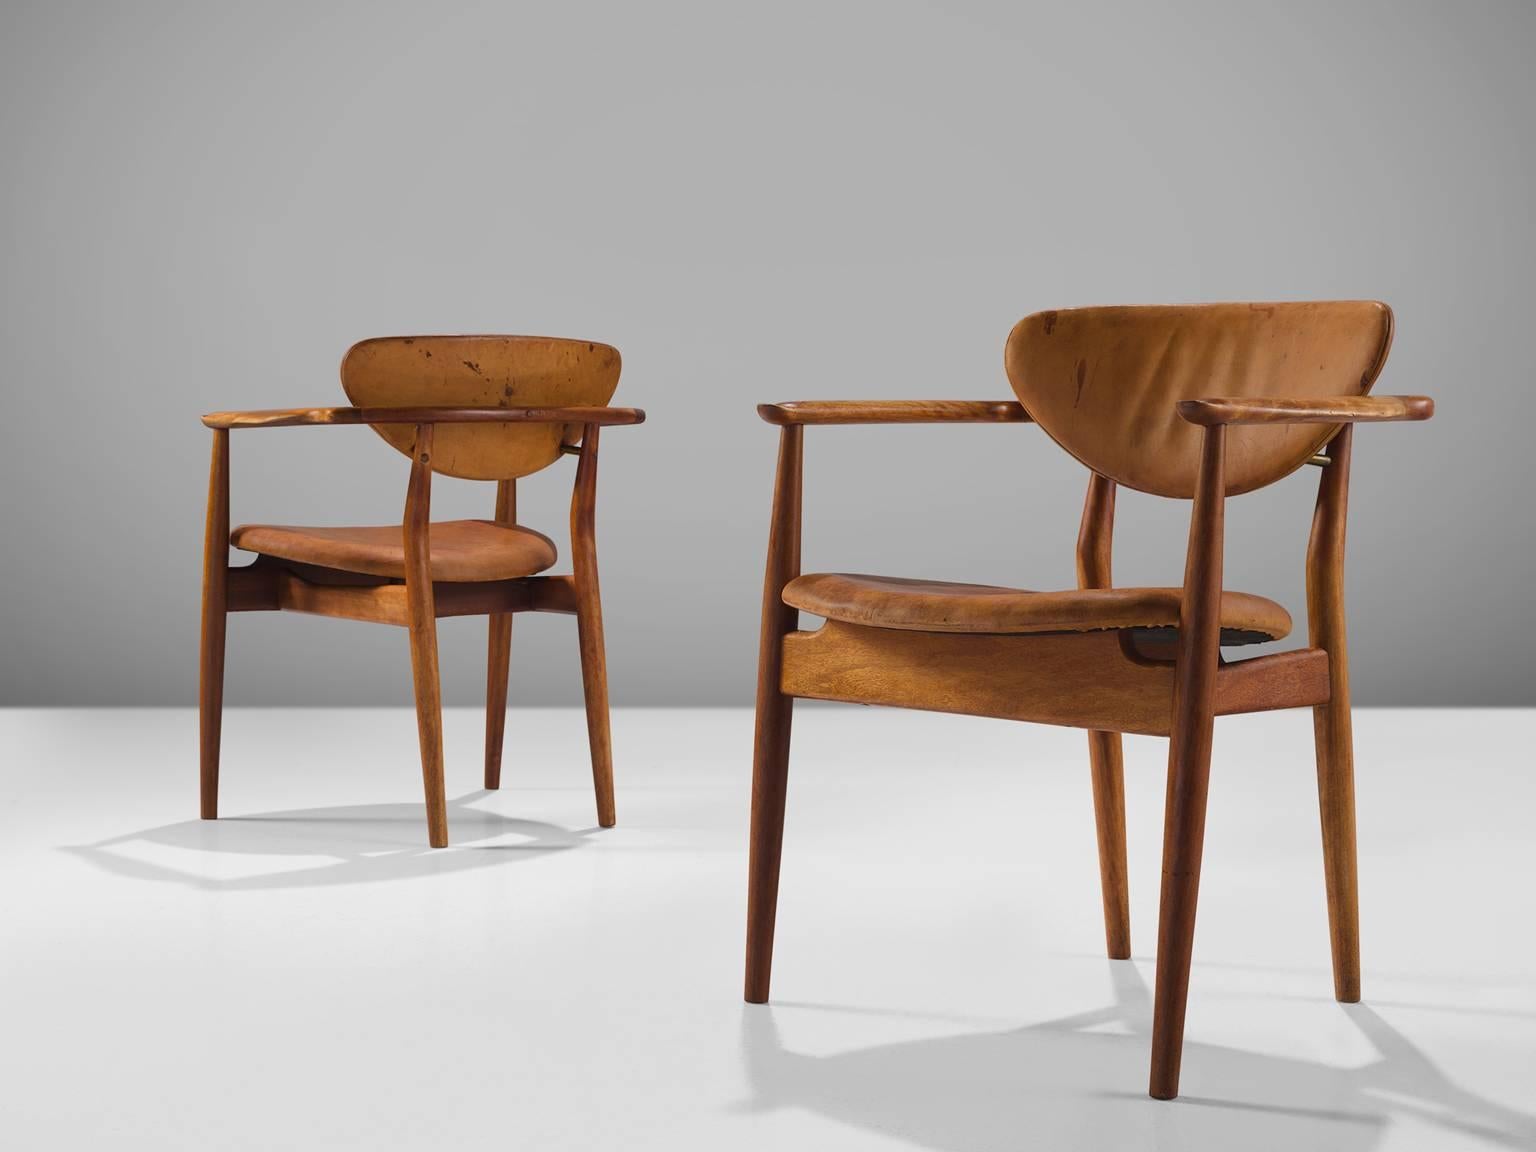 Finn Juhl for Niels Vodder, 'FJ 55', mahogany and leather, Denmark, 1950s.

This set of mahogany armchairs is made by Finn Juhl and executed by Niels Vodder. The chairs are quintessentially by Juhl and feature cognac leather seat and back that is